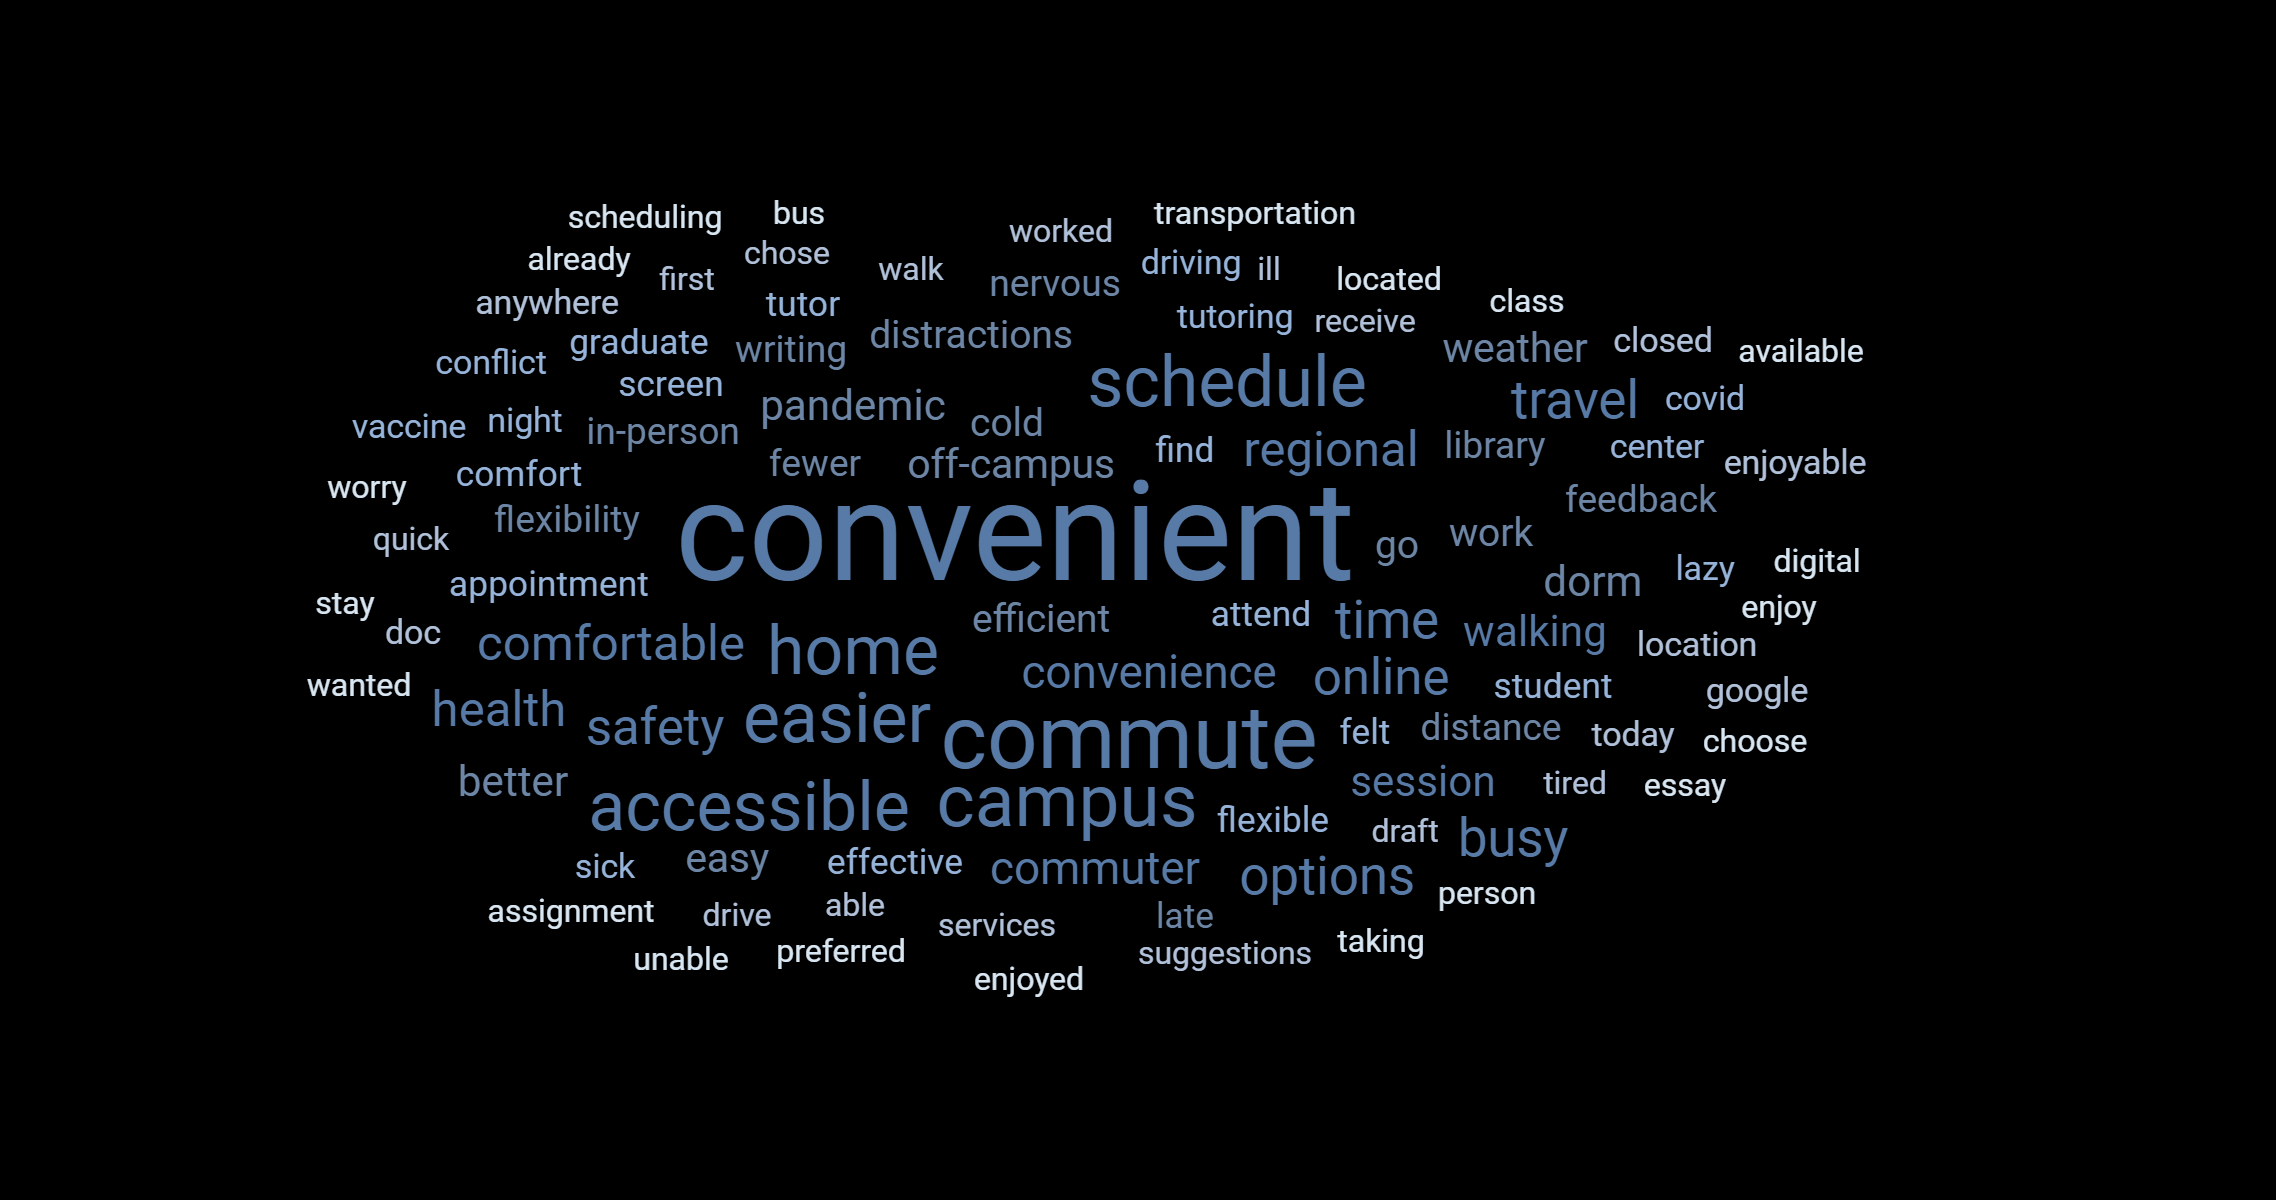 A word cloud composed using data from open-ended fields in Online Tutoring writers' survey responses. The most prominent words in the cloud are: convenient, commute, campus, accessible, easier, schedule, home, comfortable, safety, health, online, time, and busy.